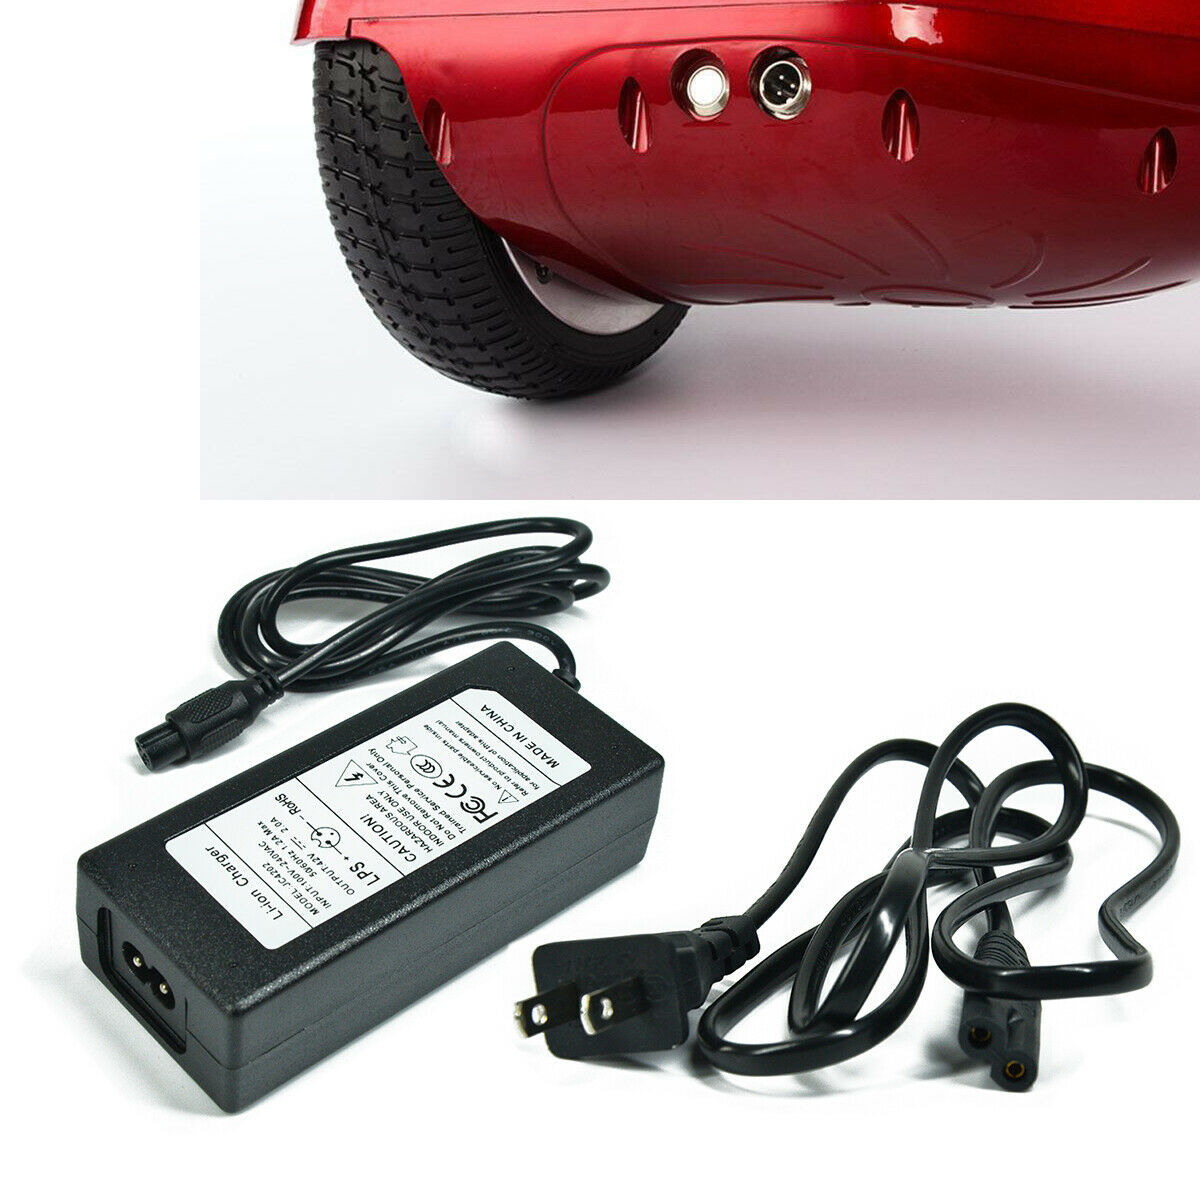 New Charger 42V 2A Adapter For Hoverboard Smart Balance Scooter Wheel Universal Input:: AC 100-240V 50/60Hz MPN: - Click Image to Close